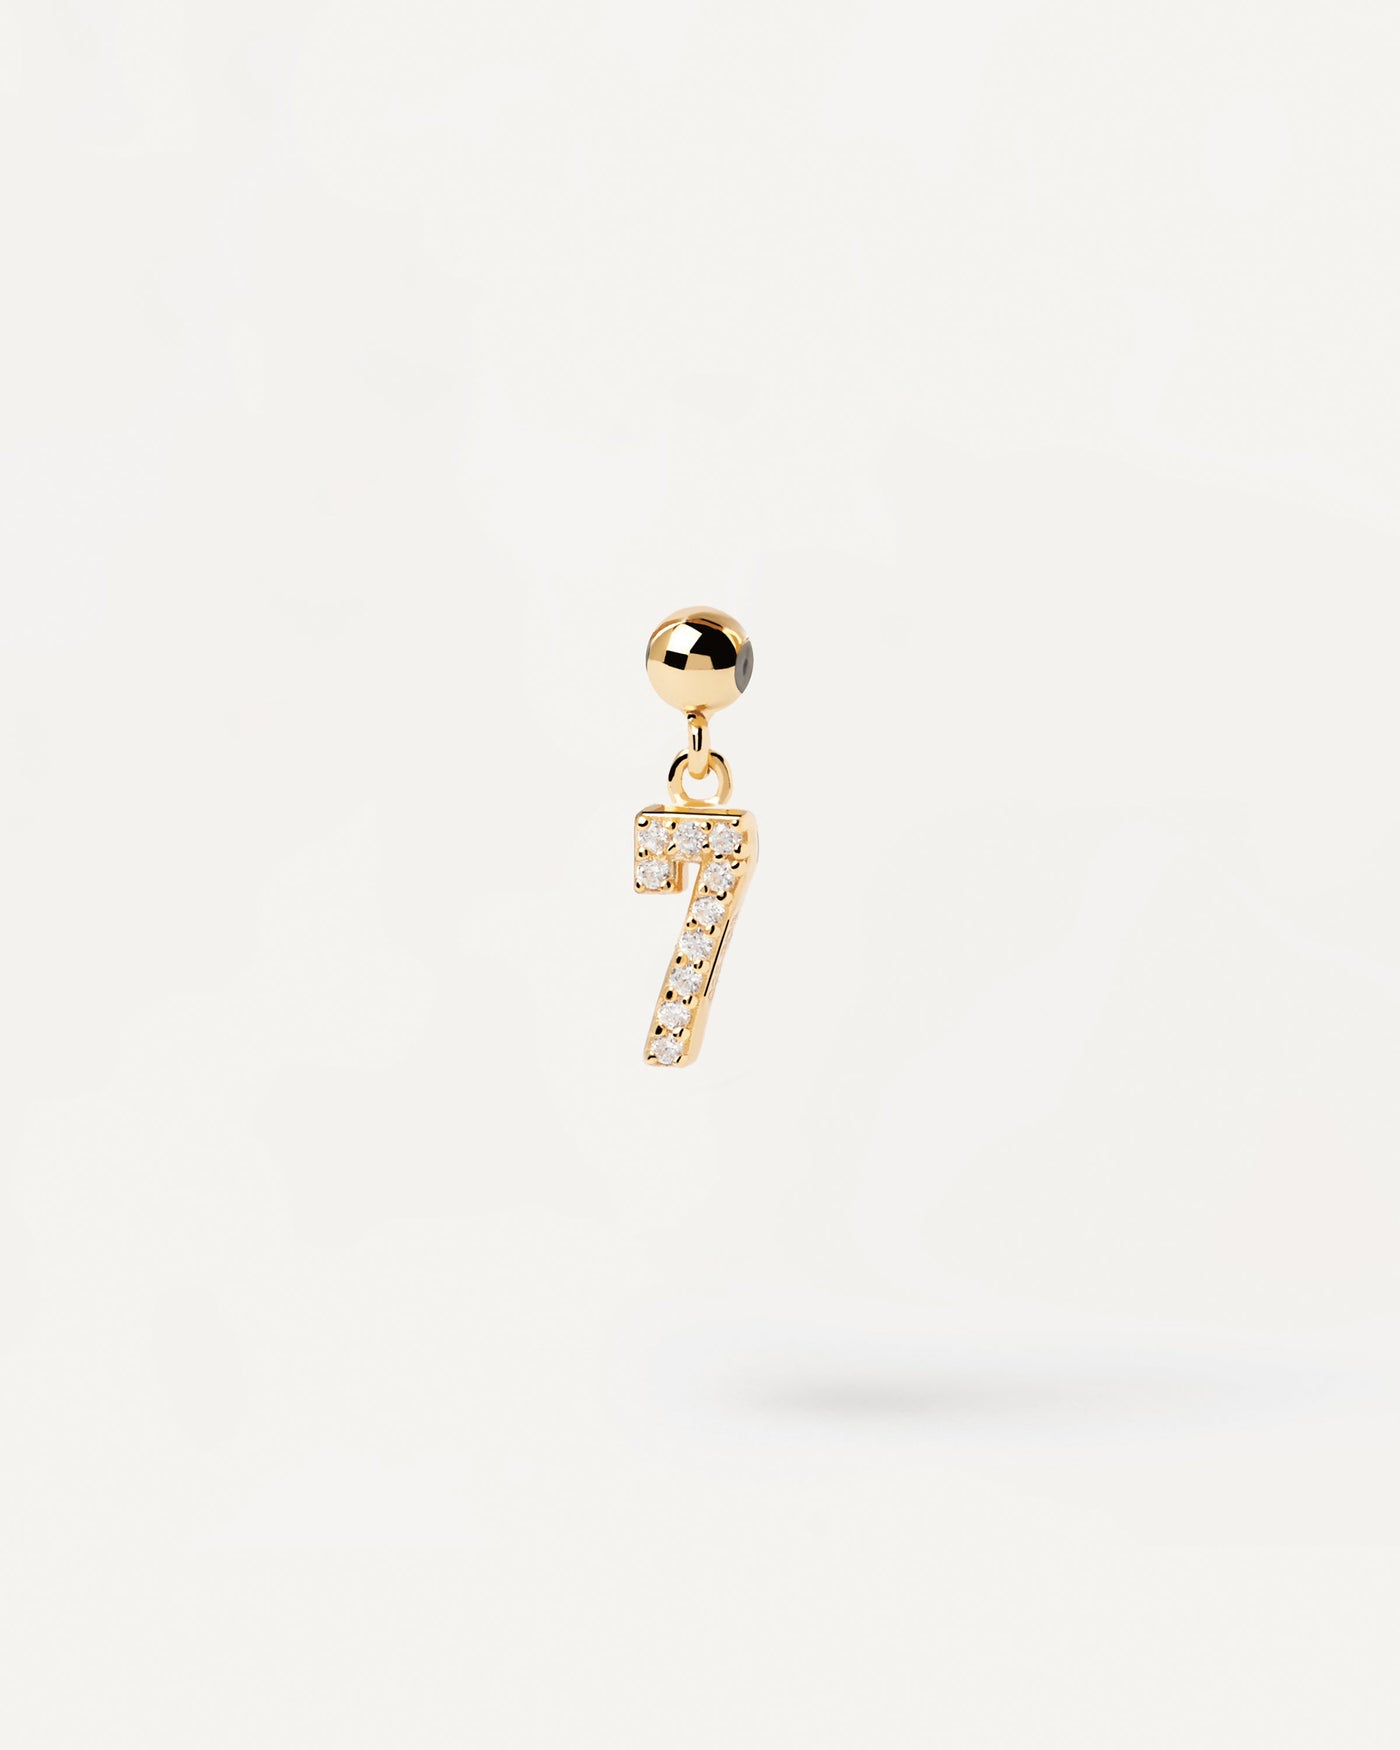 2023 Selection | Number 7 Charm. Gold-plated silver 7 number for Charm necklace or bracelet with white zirconia. Get the latest arrival from PDPAOLA. Place your order safely and get this Best Seller. Free Shipping.